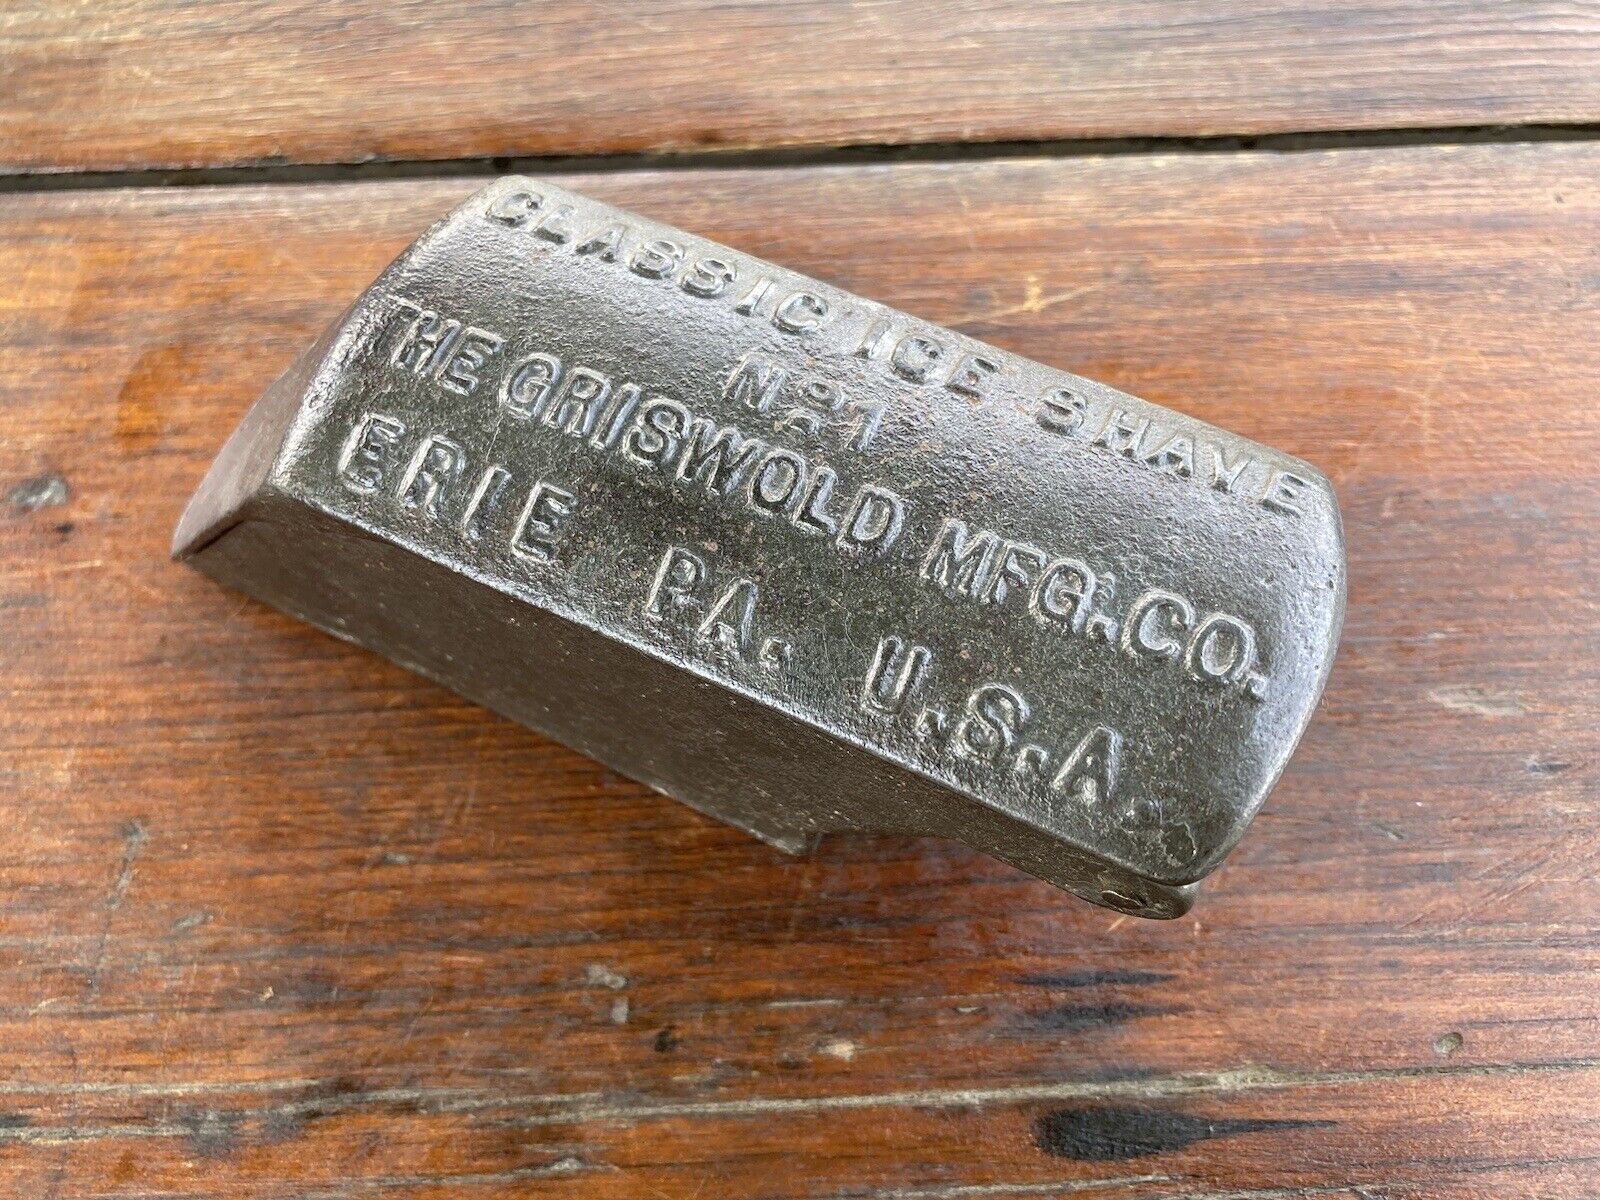 Griswold Cast Iron Fully Marked Ice Shave